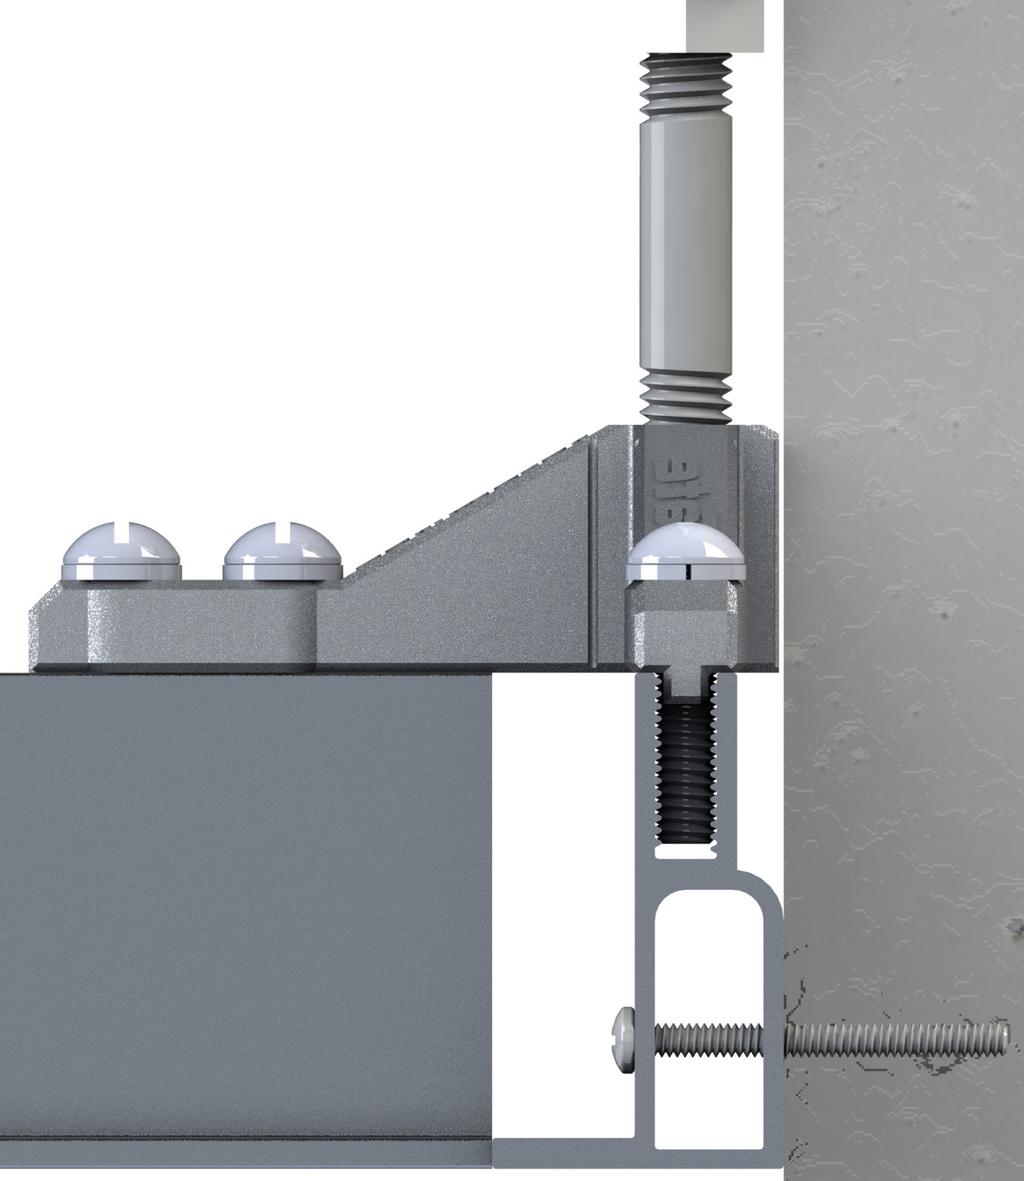 When installing with a floating perimeter, XL Connectors can be utilized to take advantage of the notches and ribs that align extrusions and prevent racking.